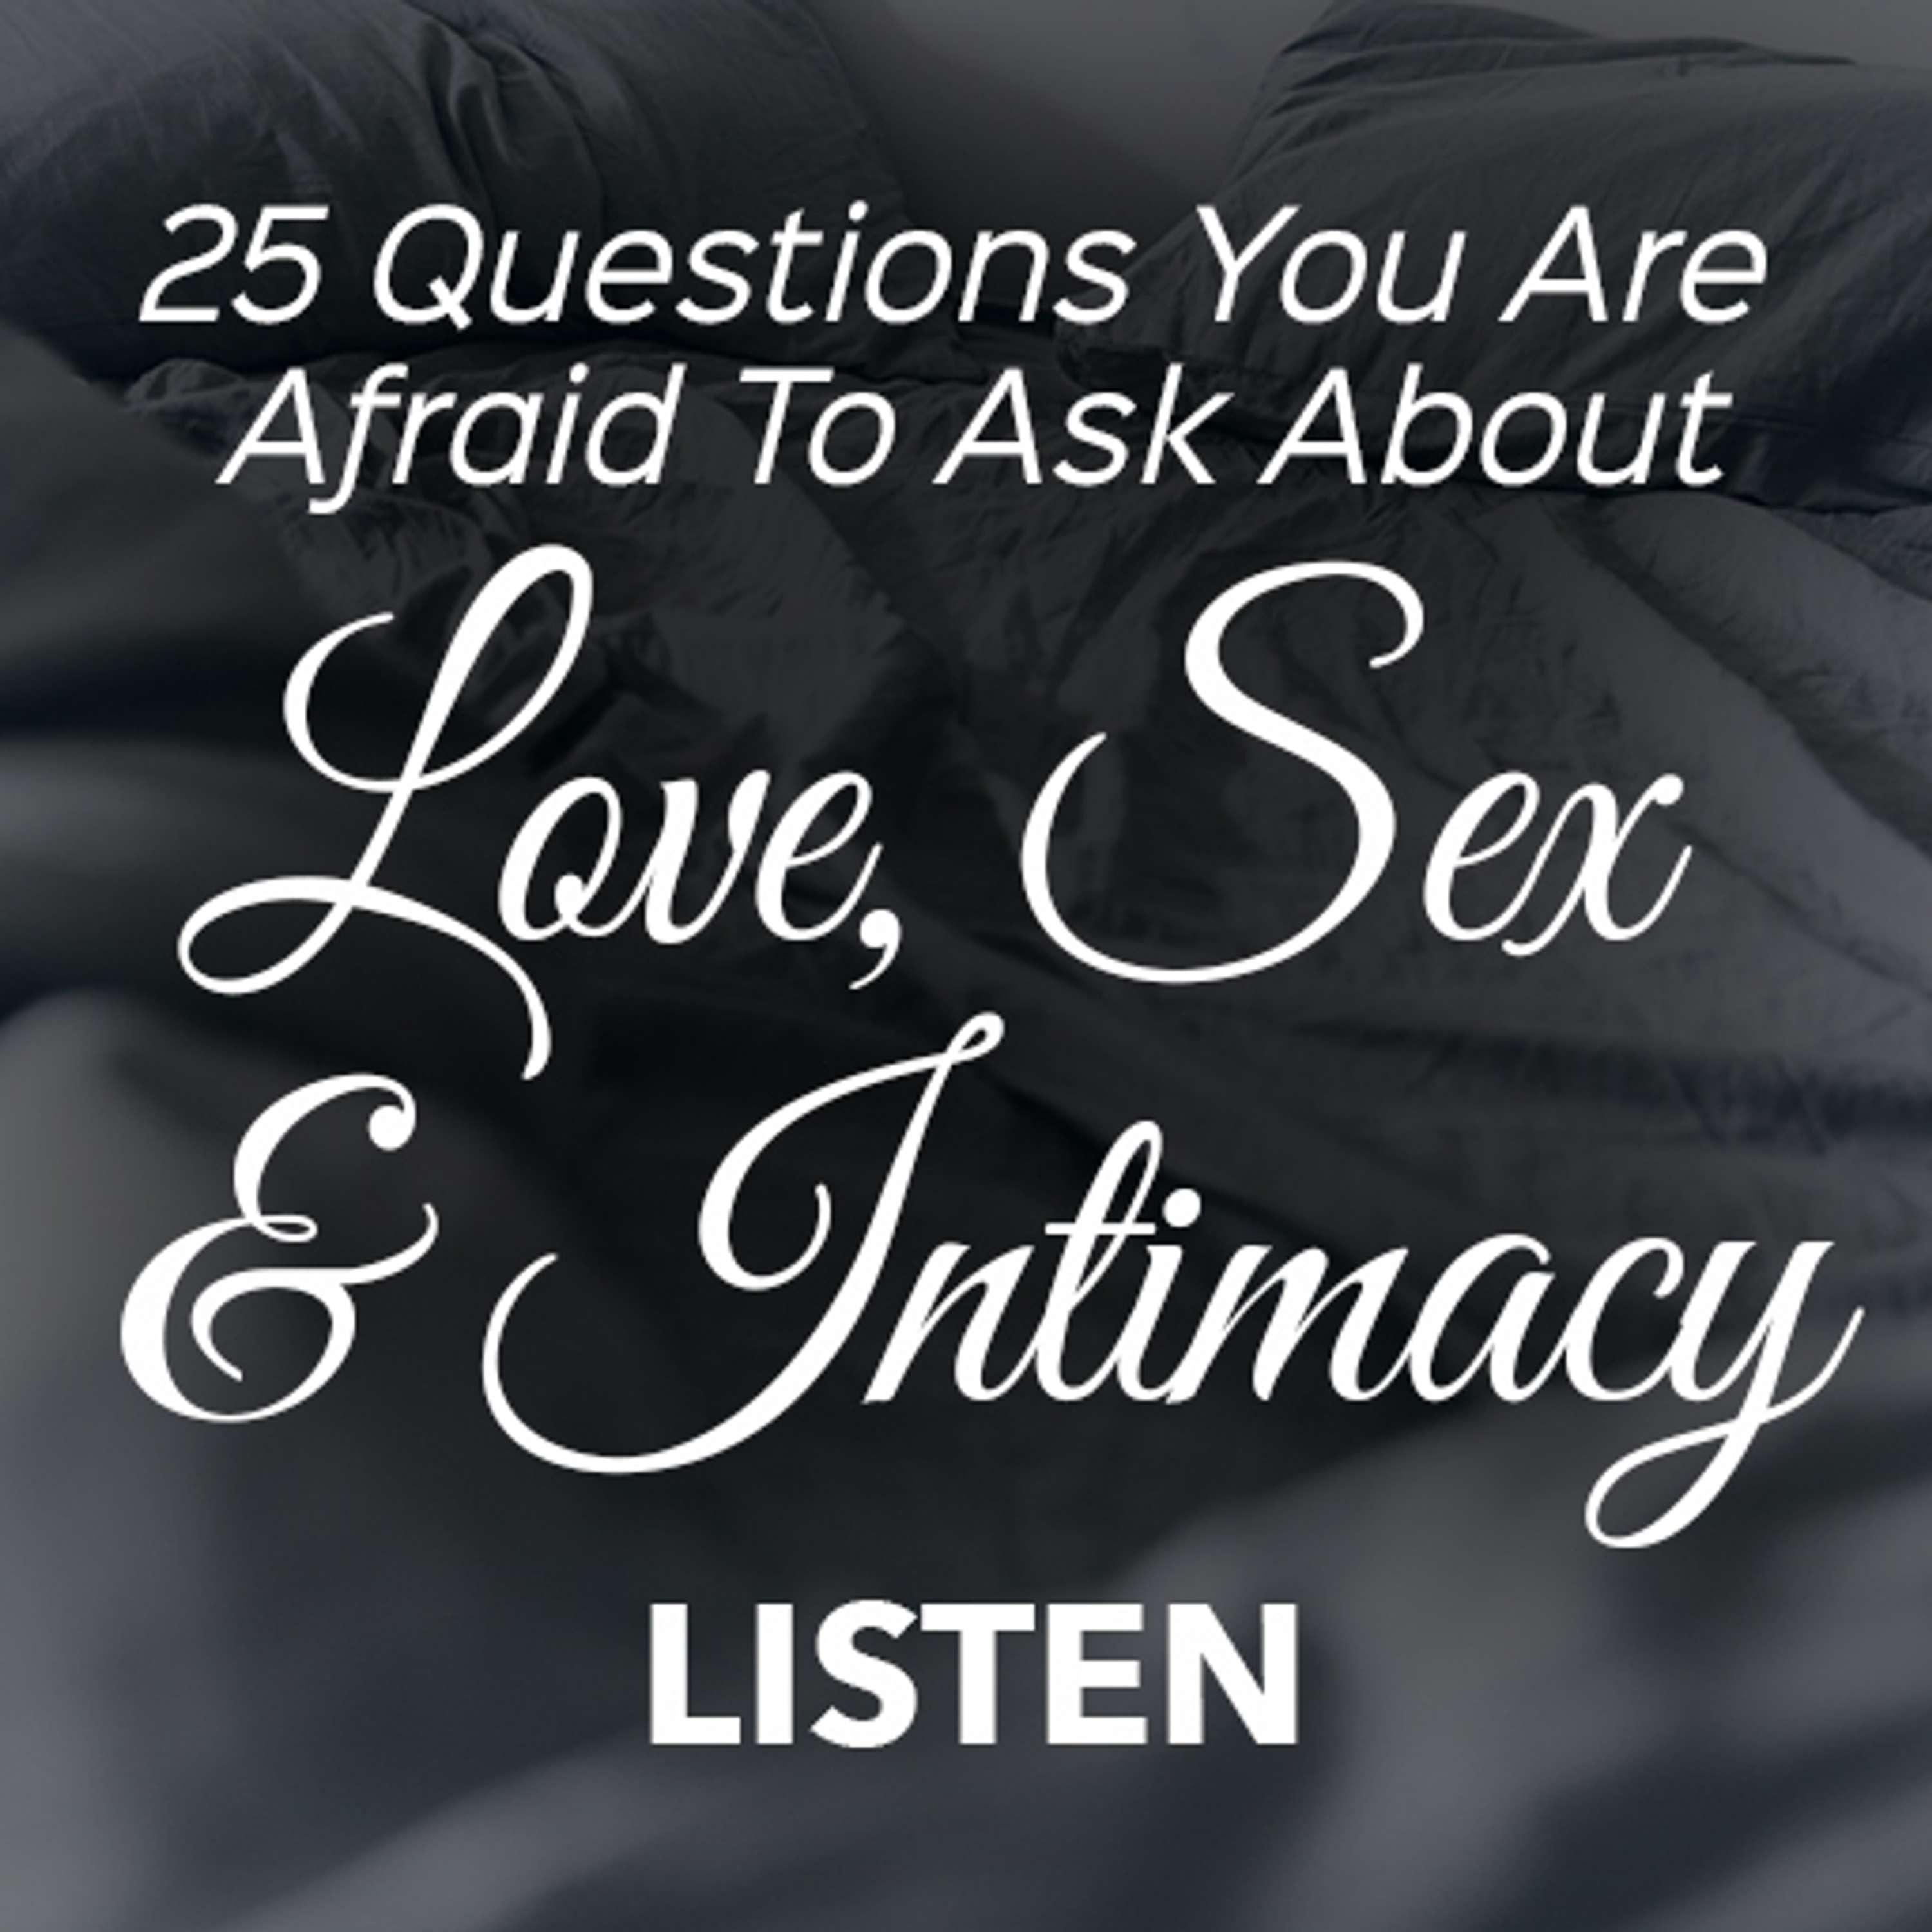 25 Questions You Are Afraid to Ask About Love, Sex and Intimacy (Part 3) - Juli Slattery